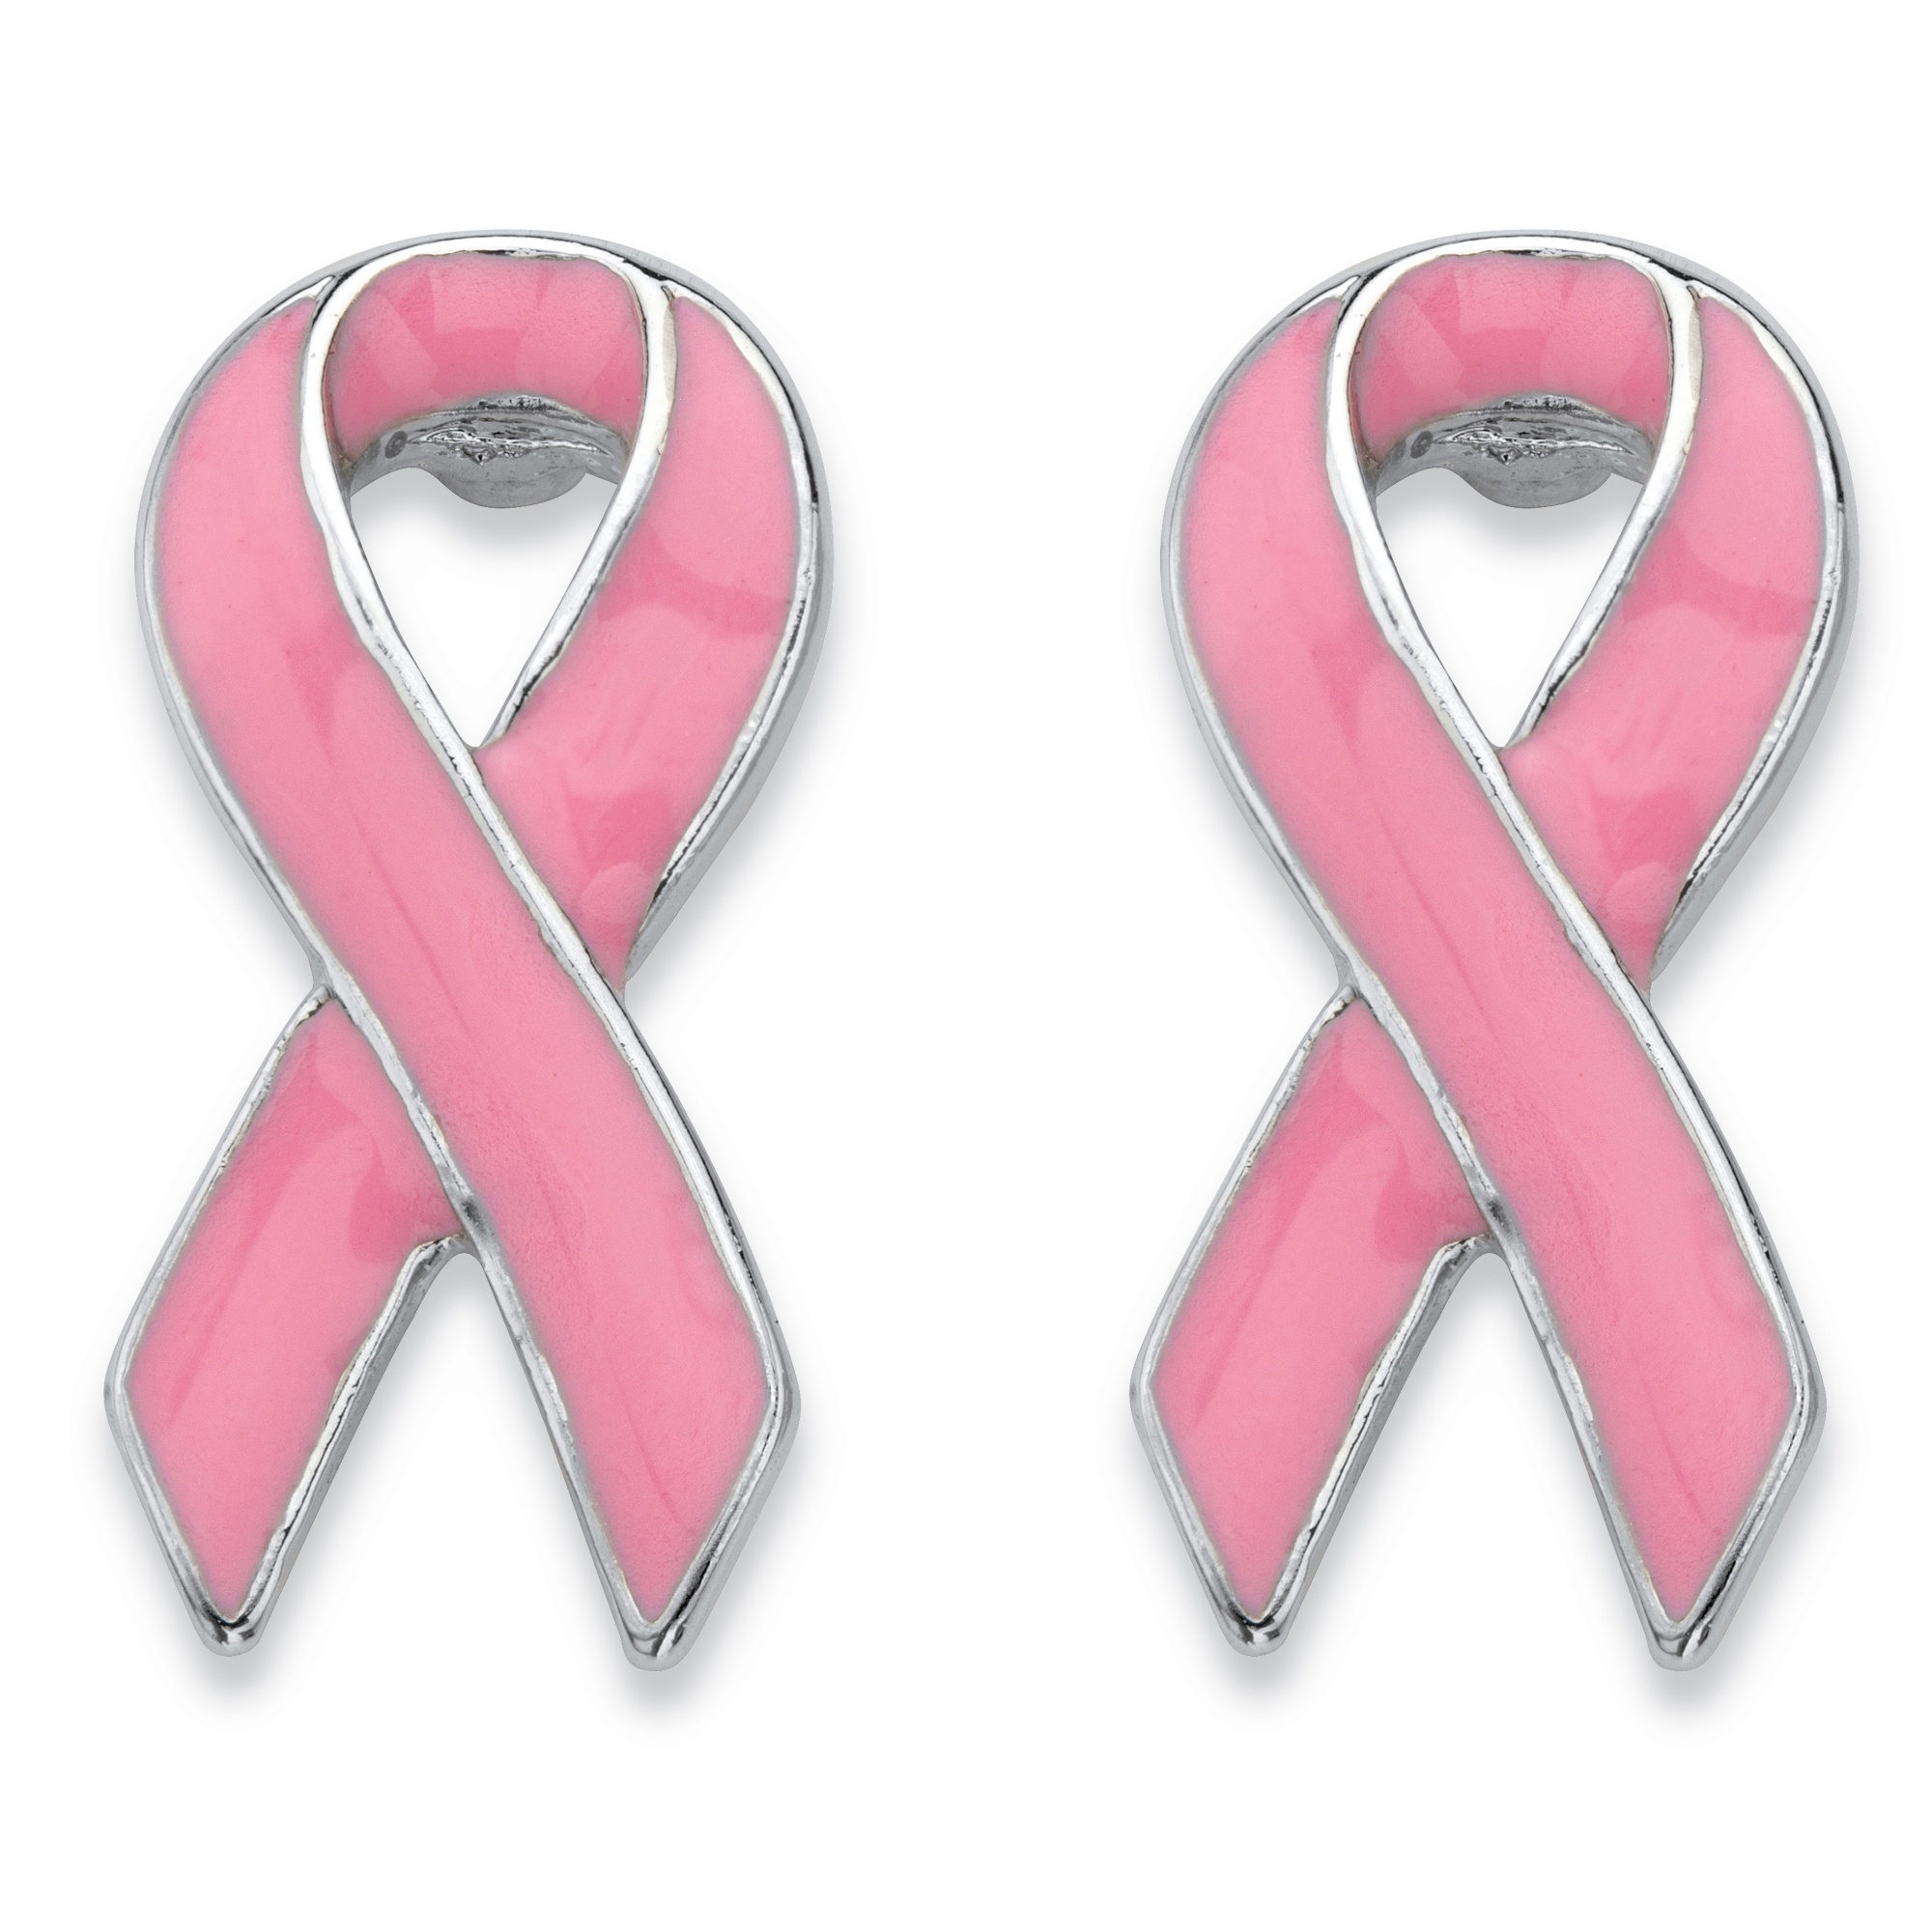 Pink Breast Cancer Awareness Ribbon Earrings In Silvertone And Enamel At Palmbeach Jewelry